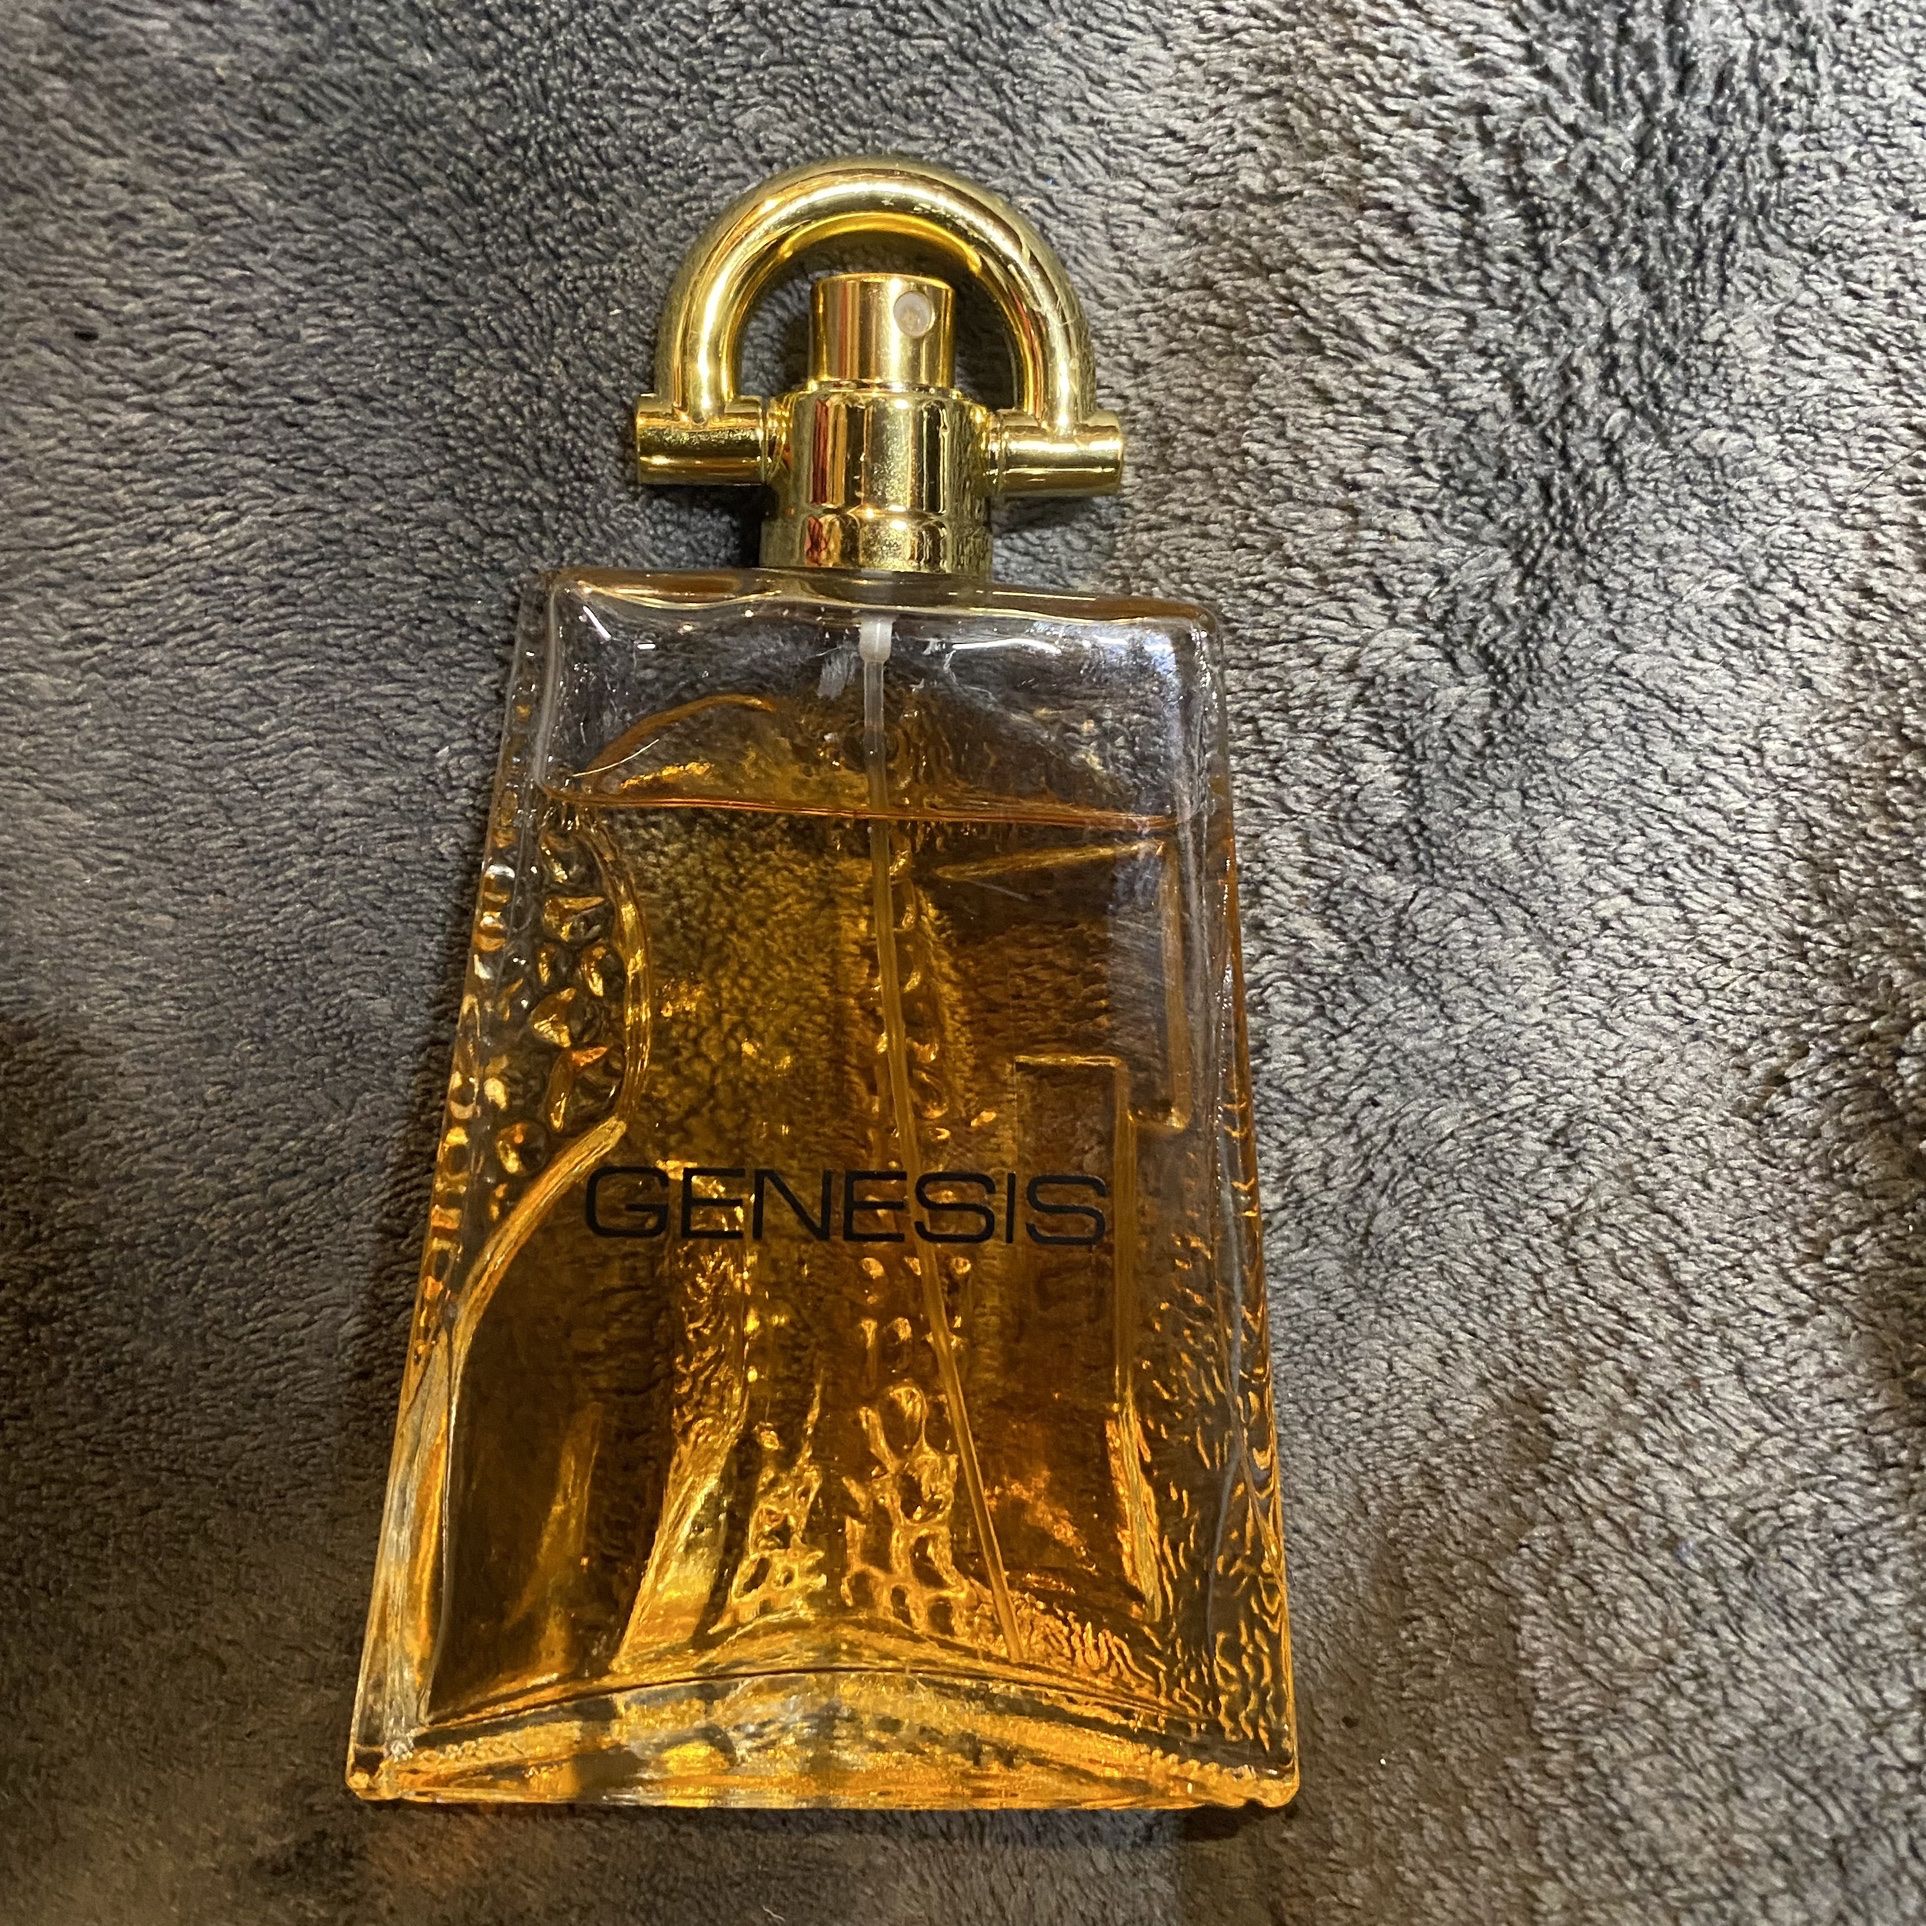 Louis Vuitton Imagination Cologne. Brand New $260 for Sale in Arlington  Heights, IL - OfferUp